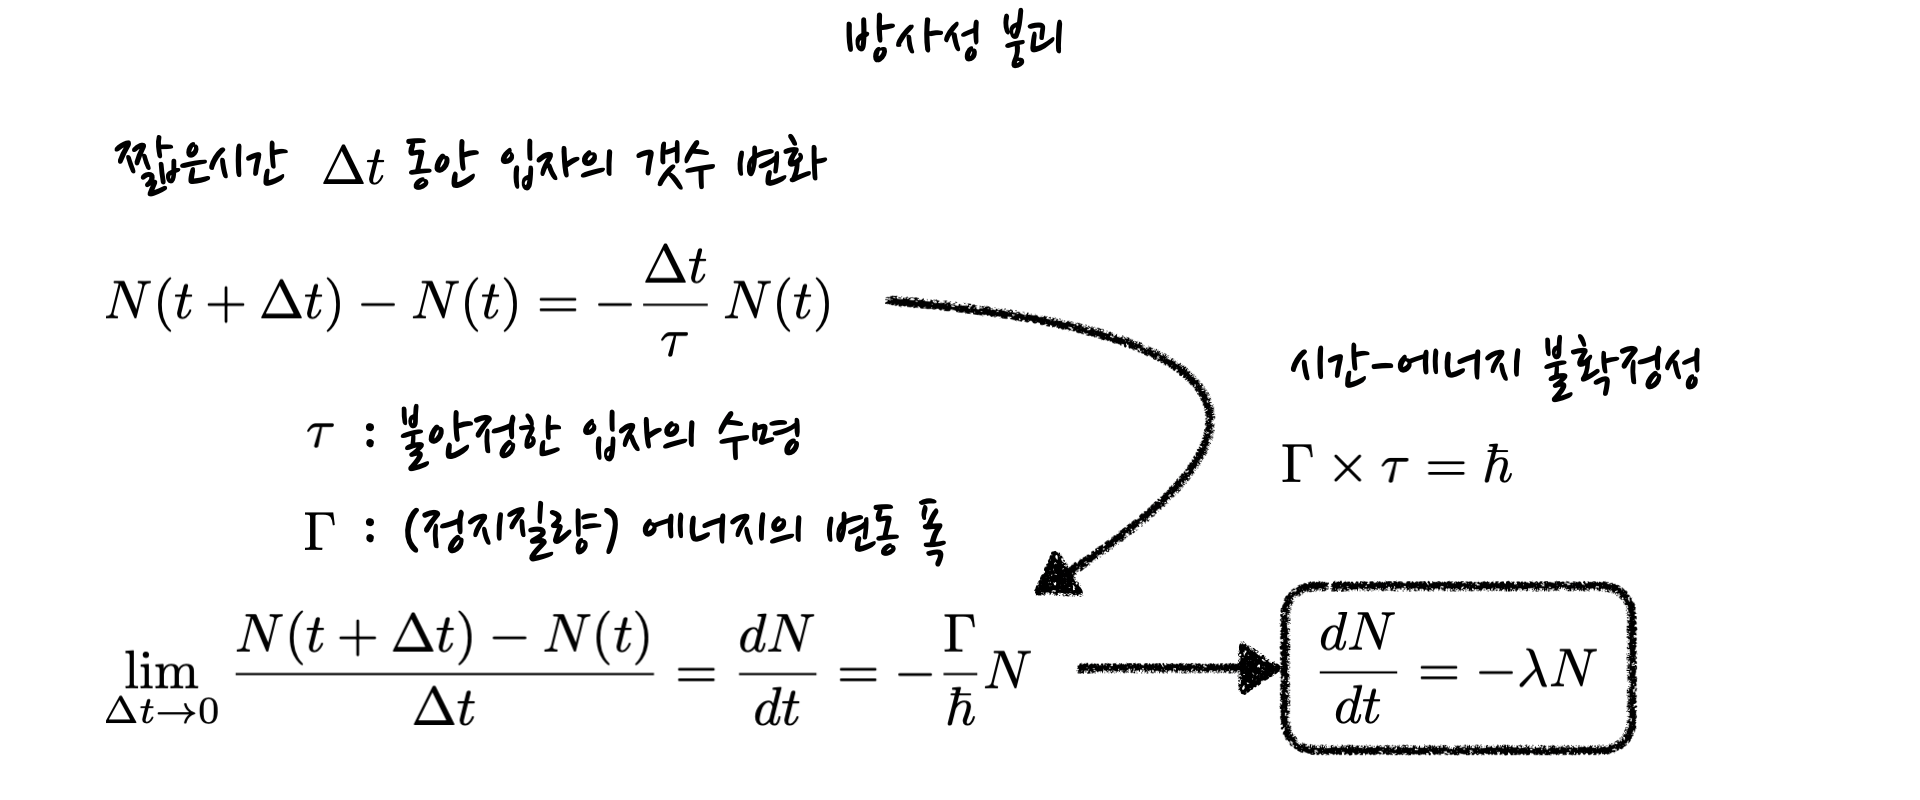 differential equation for the number of decaying particles, which is derived from the time-energy uncertainty